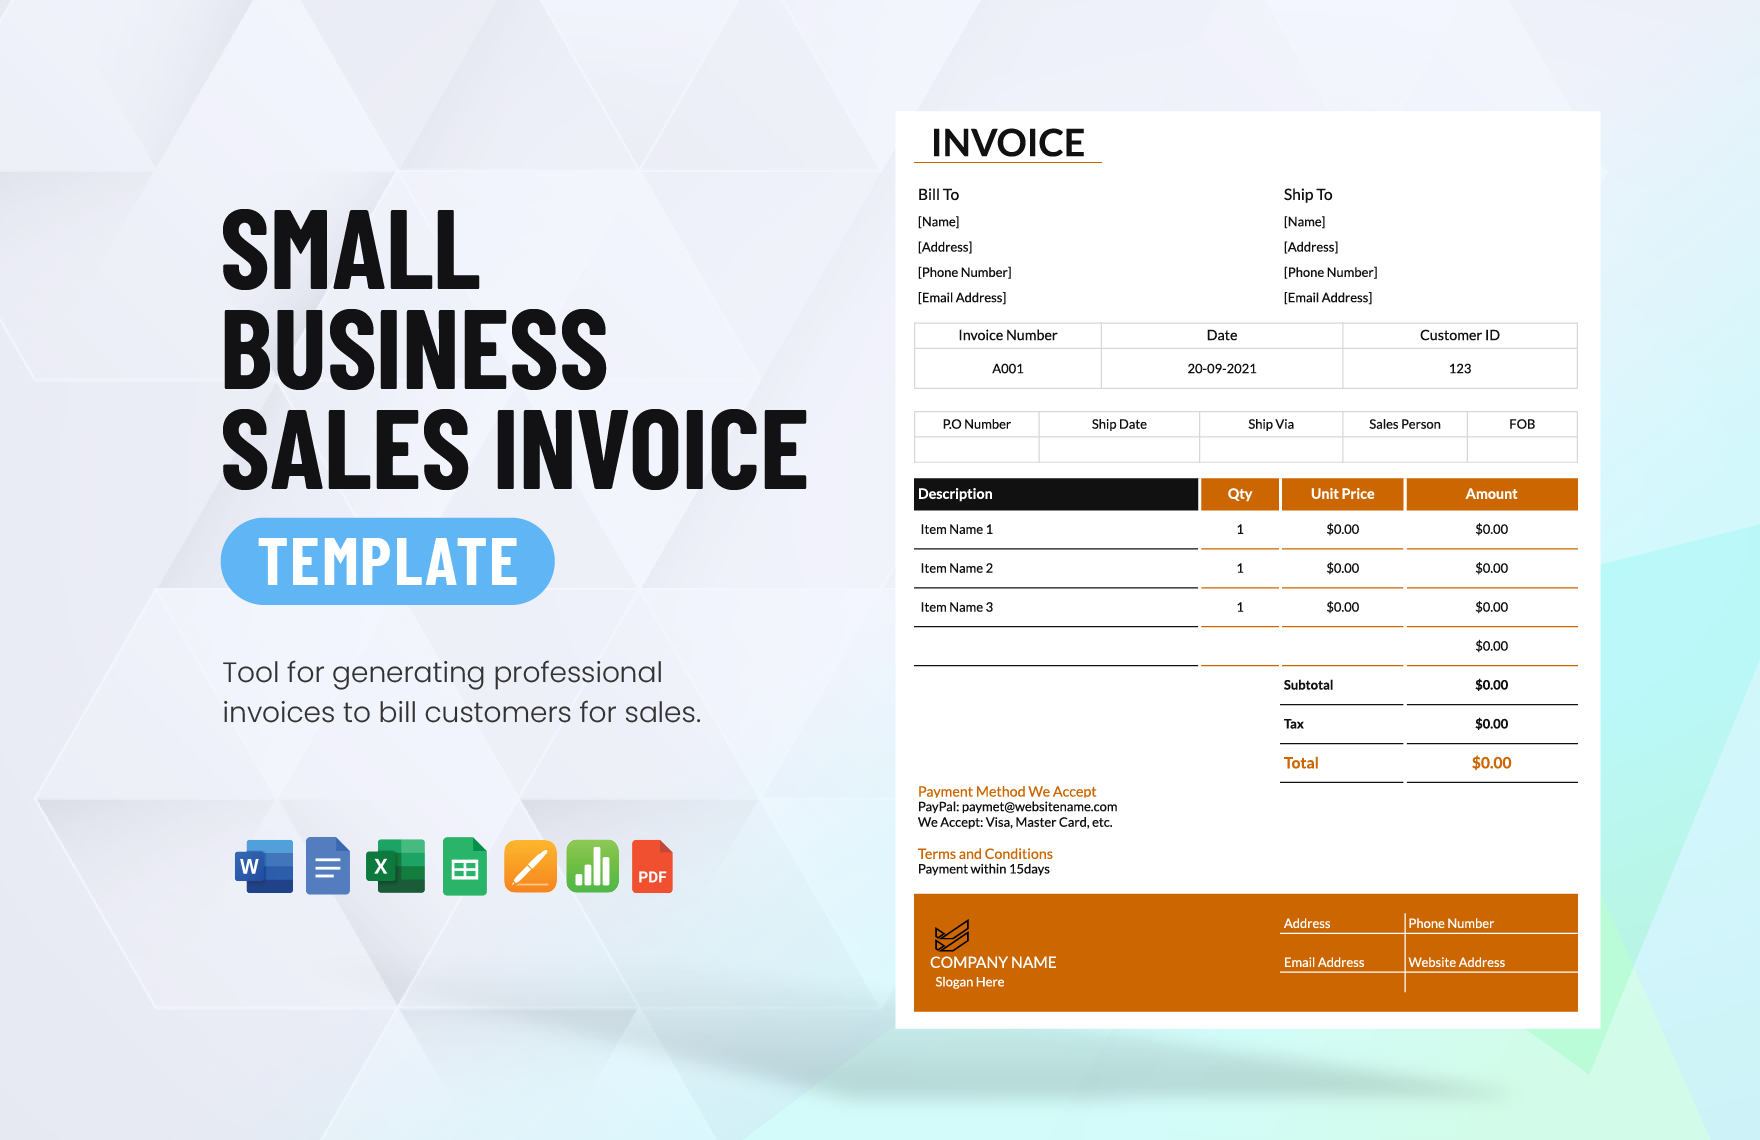 Small Business Sales Invoice Template in Word, Google Docs, Excel, PDF, Google Sheets, Apple Pages, Apple Numbers